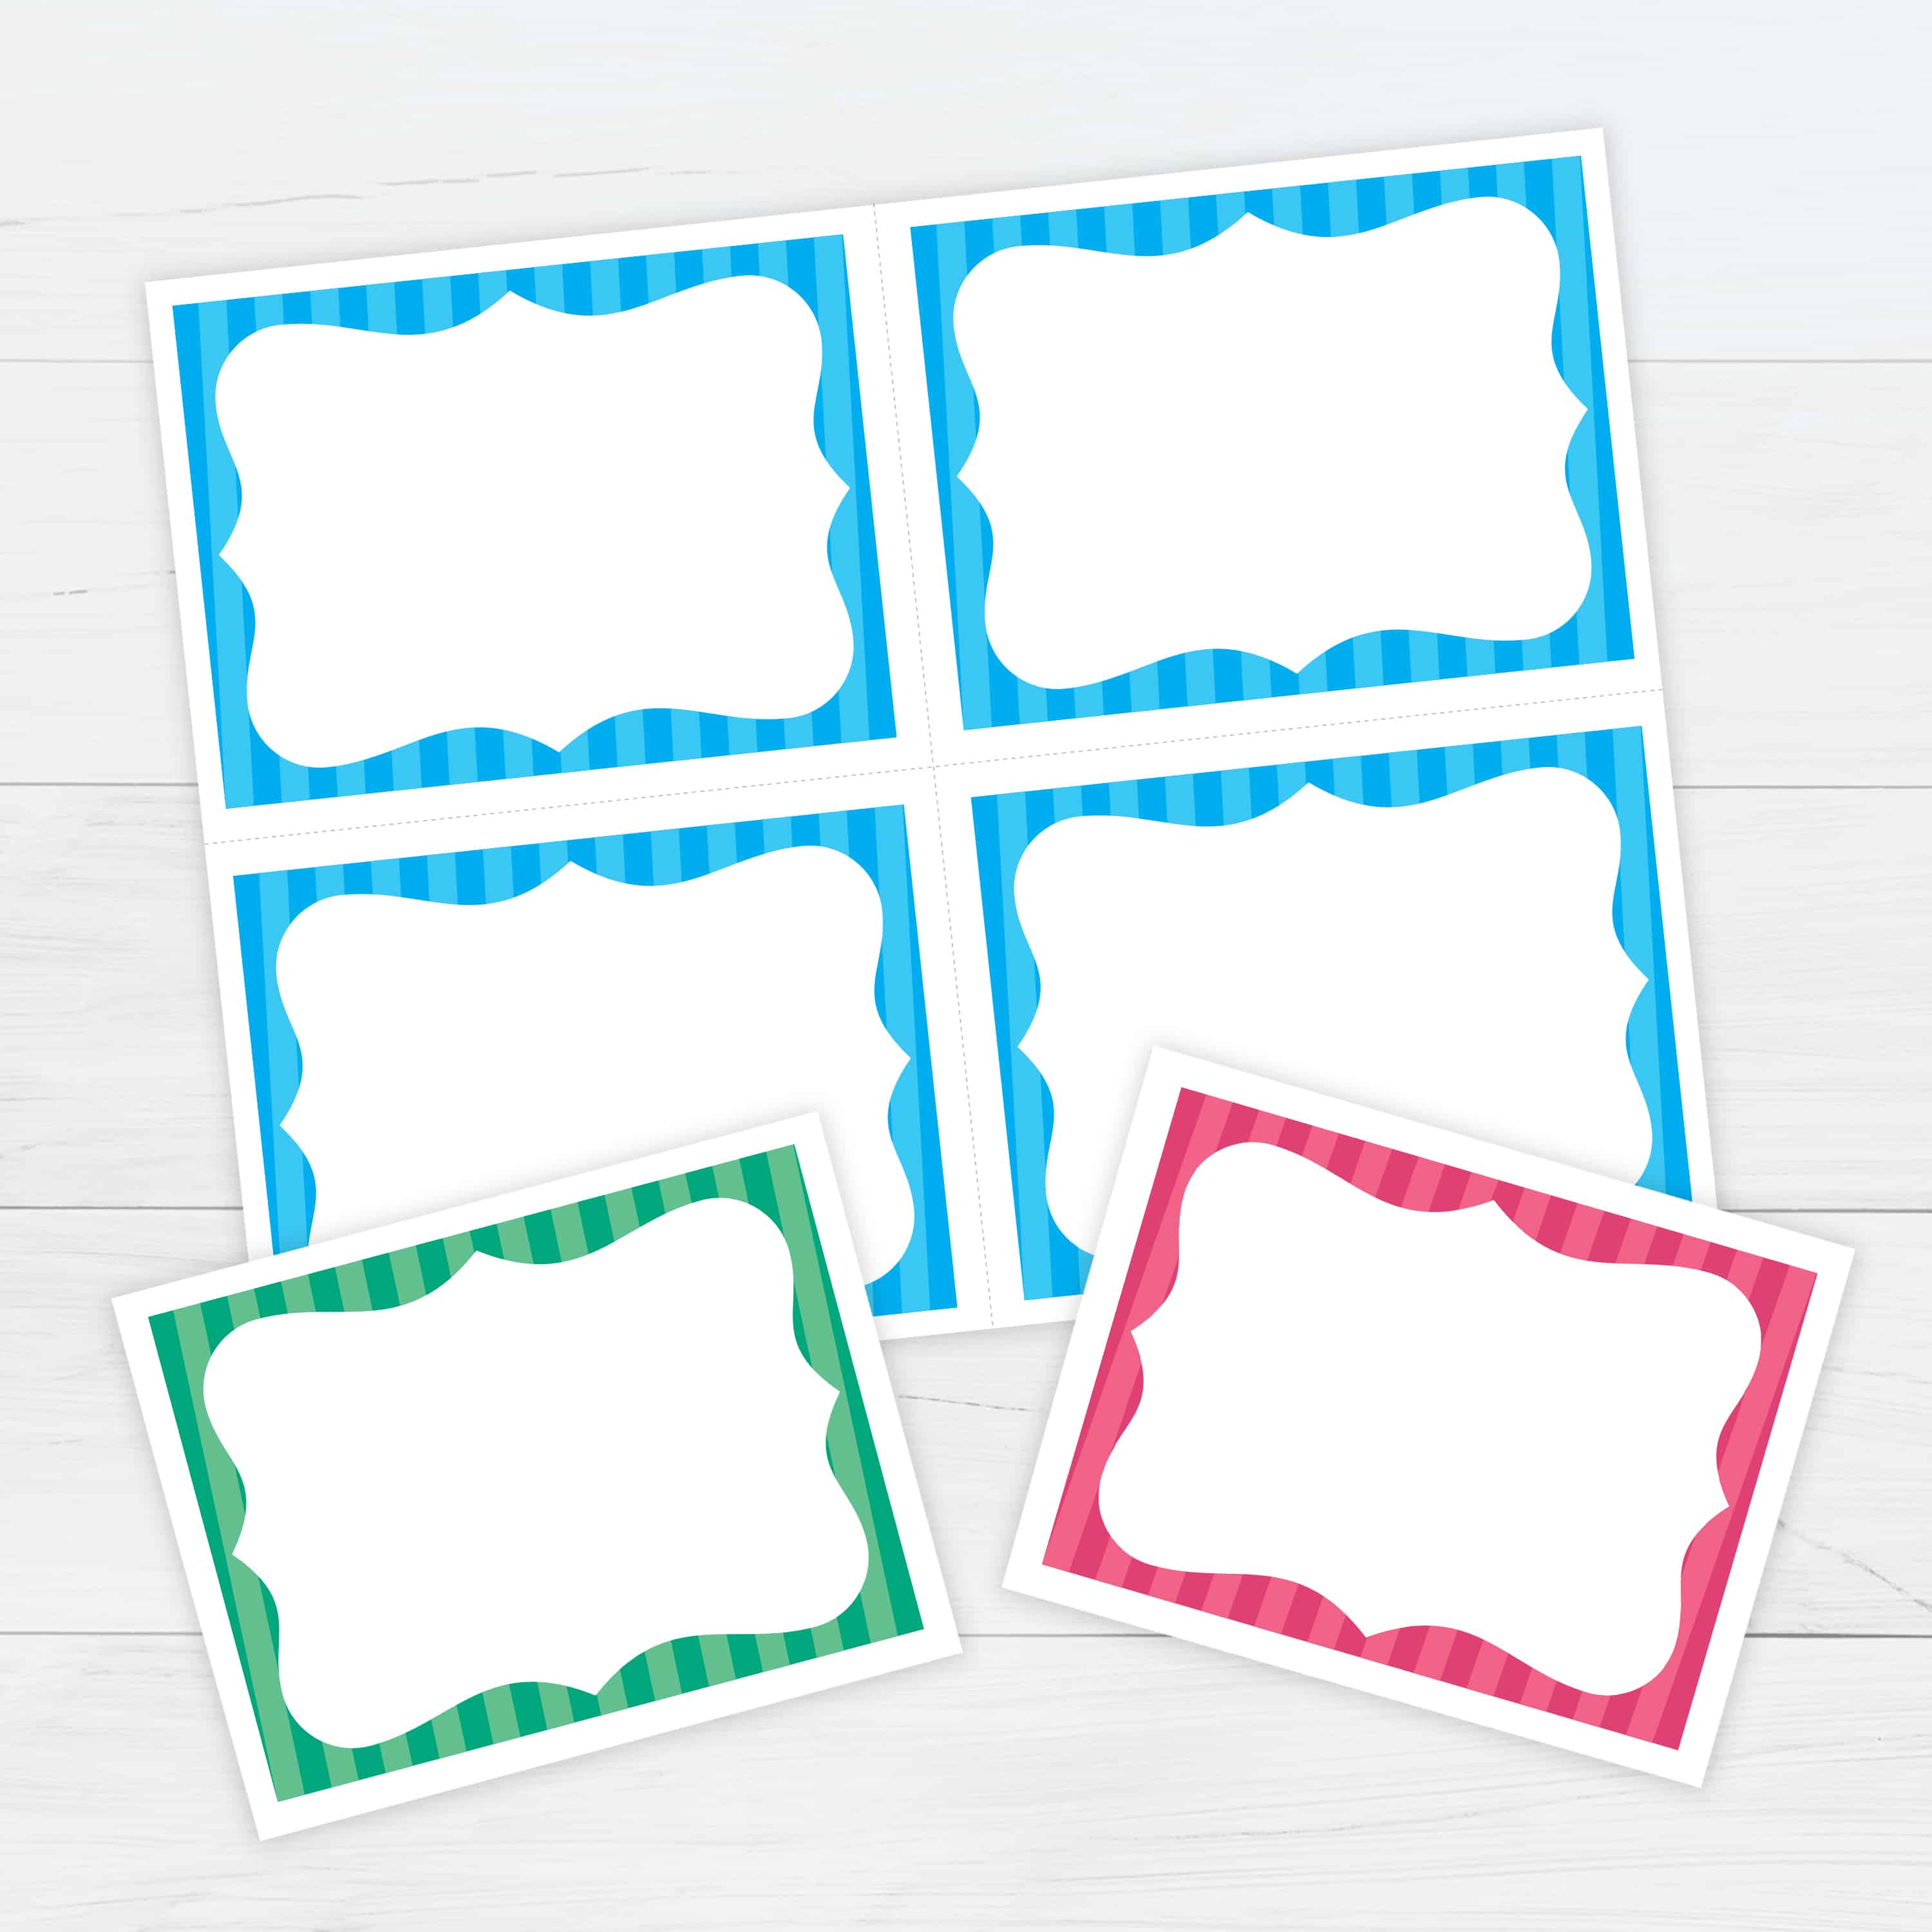 Bordered Flash cards Template 21 - Free Printable Download Inside Free Printable Flash Cards Template